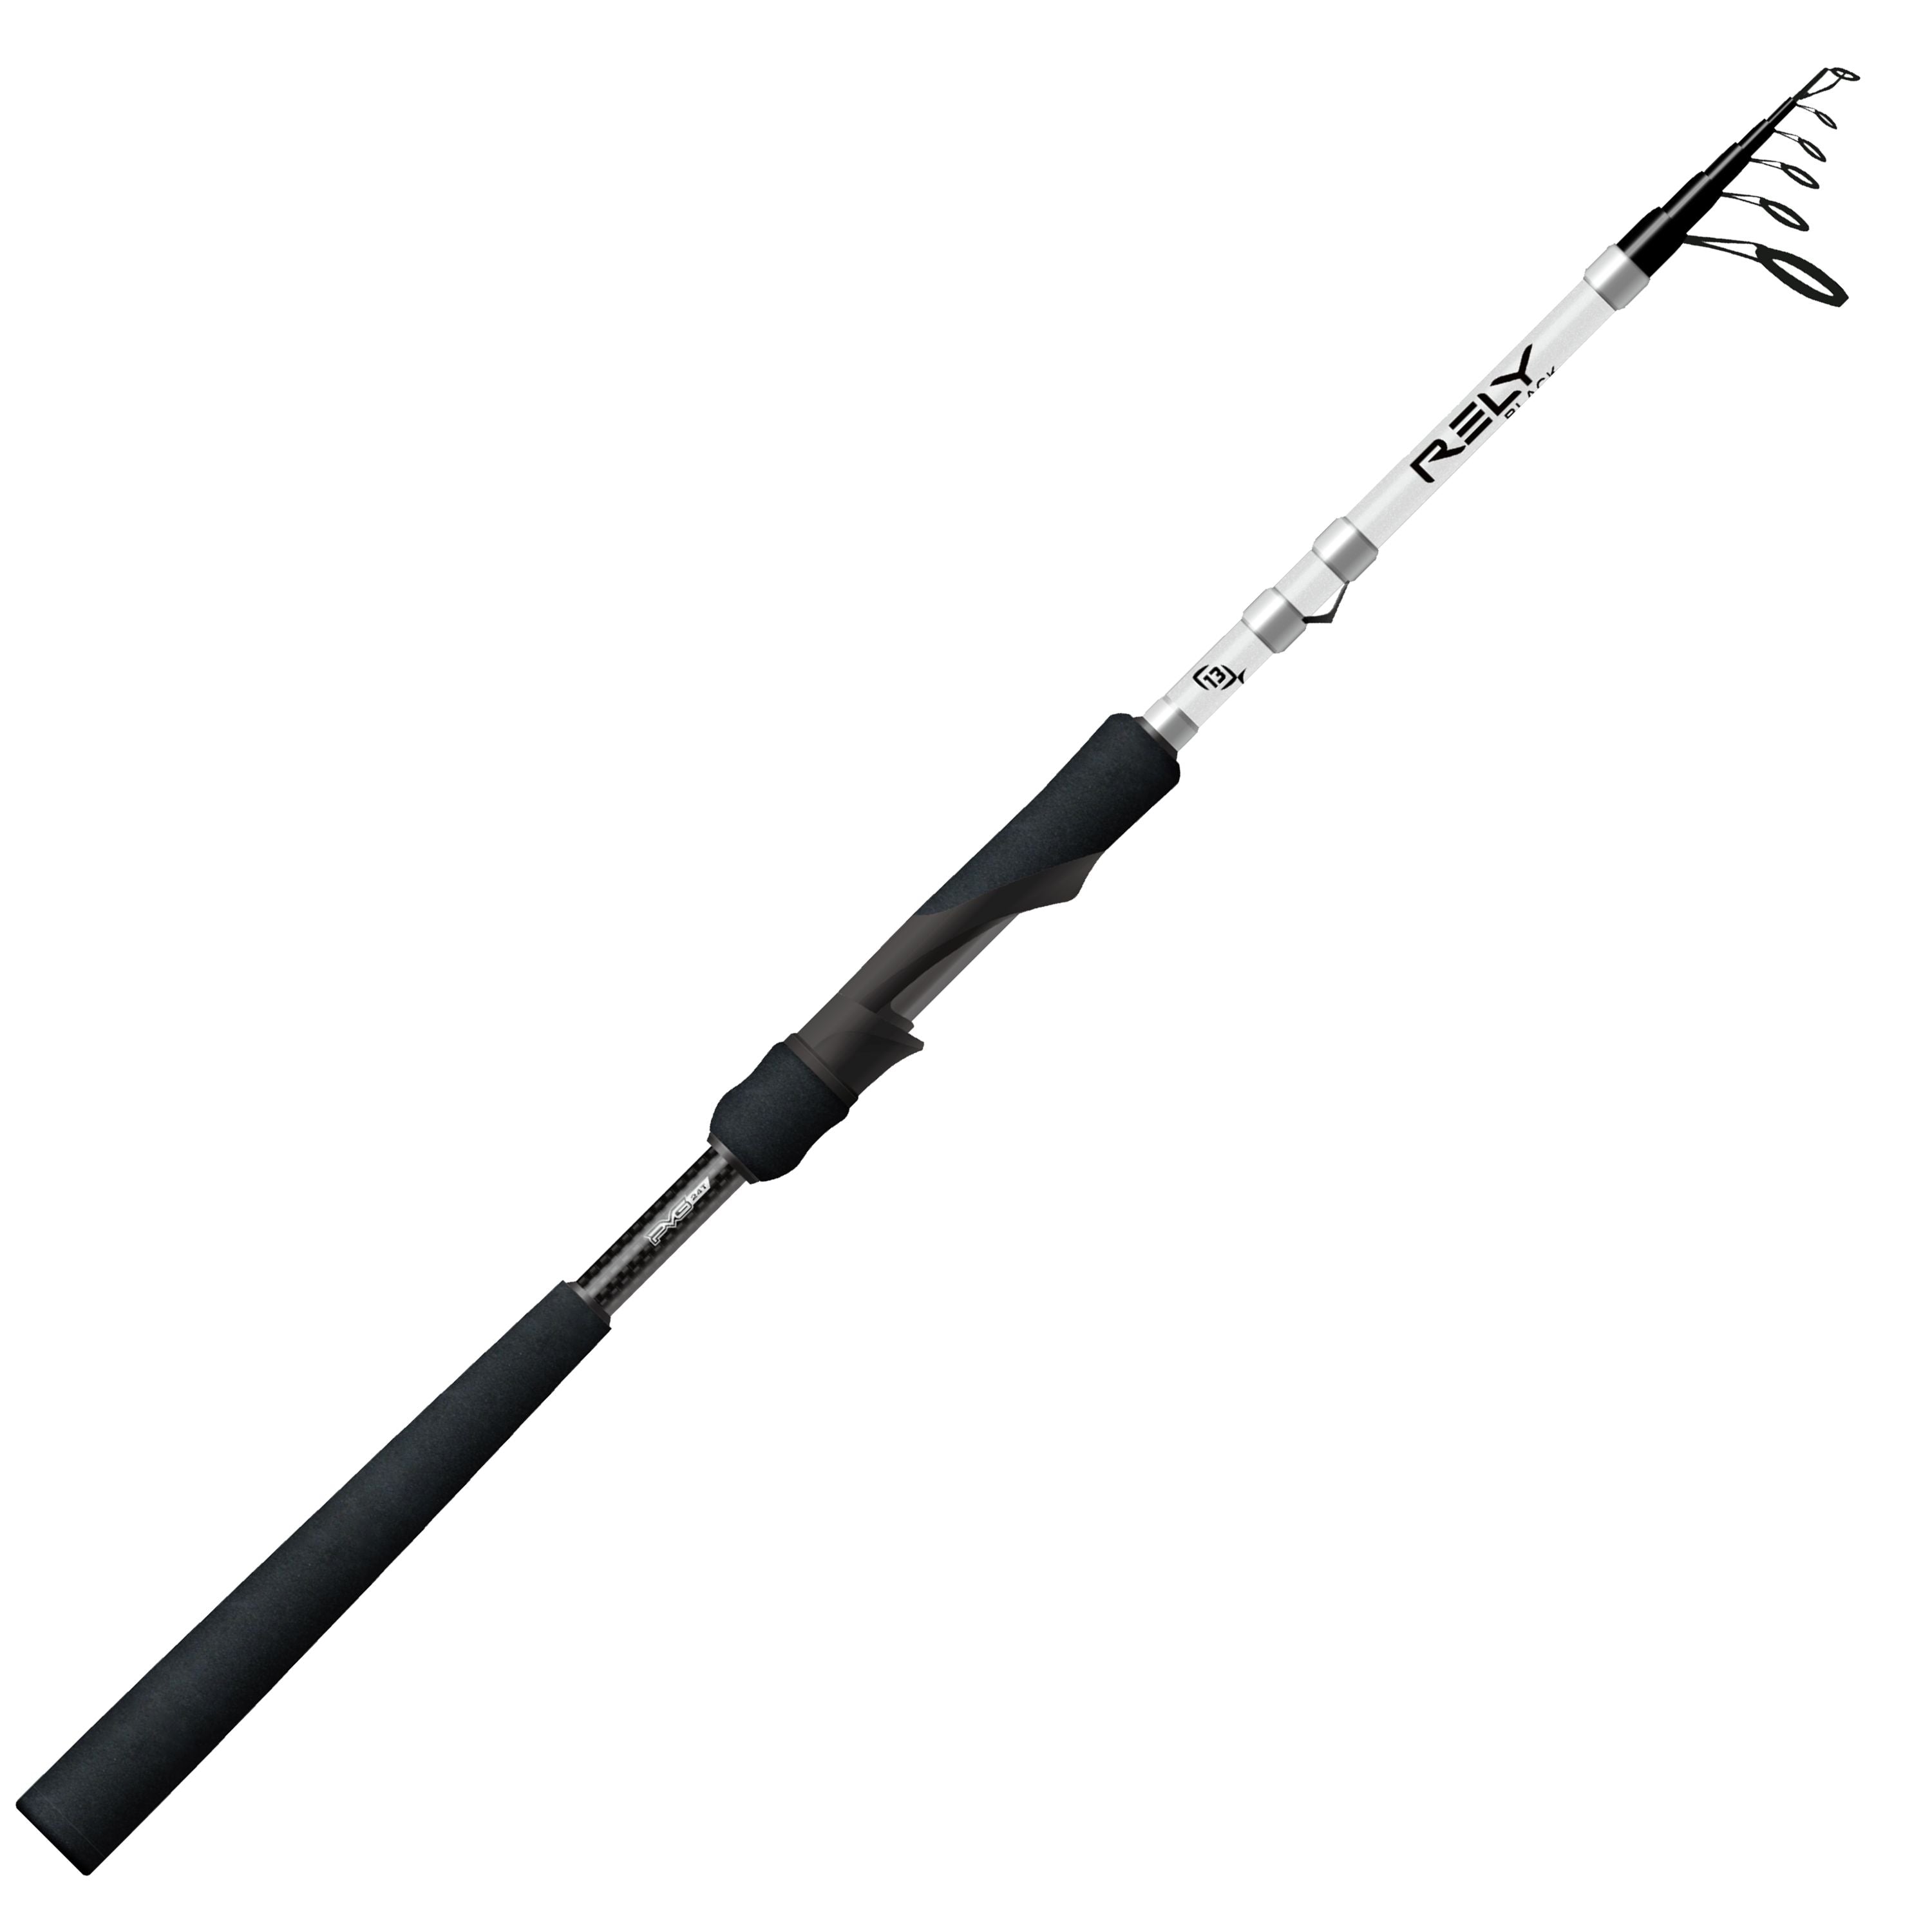 Rely Black Telescopic spinning rod